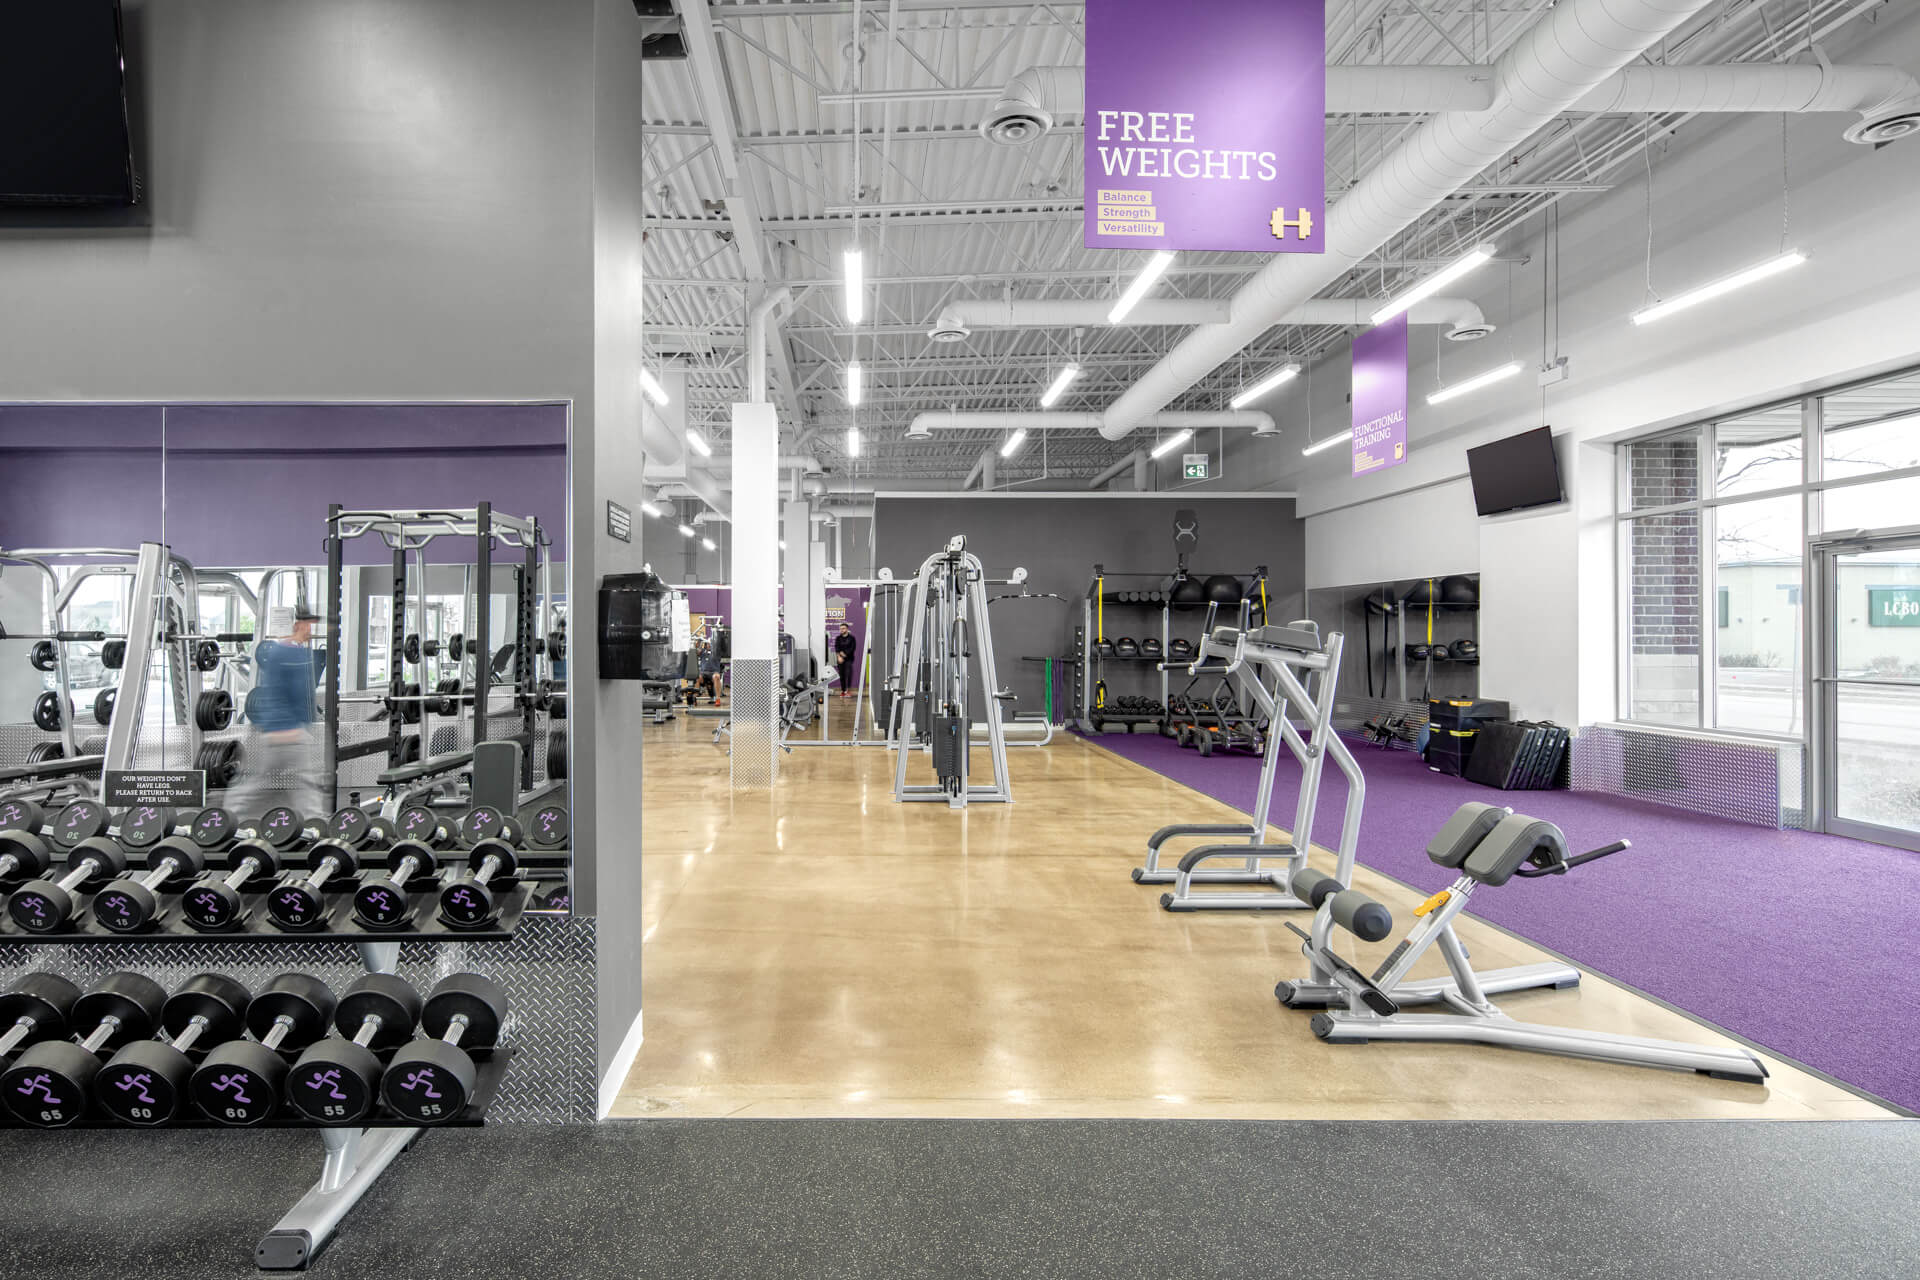 15 Minute Anytime Fitness Near Me Hiring for Gym